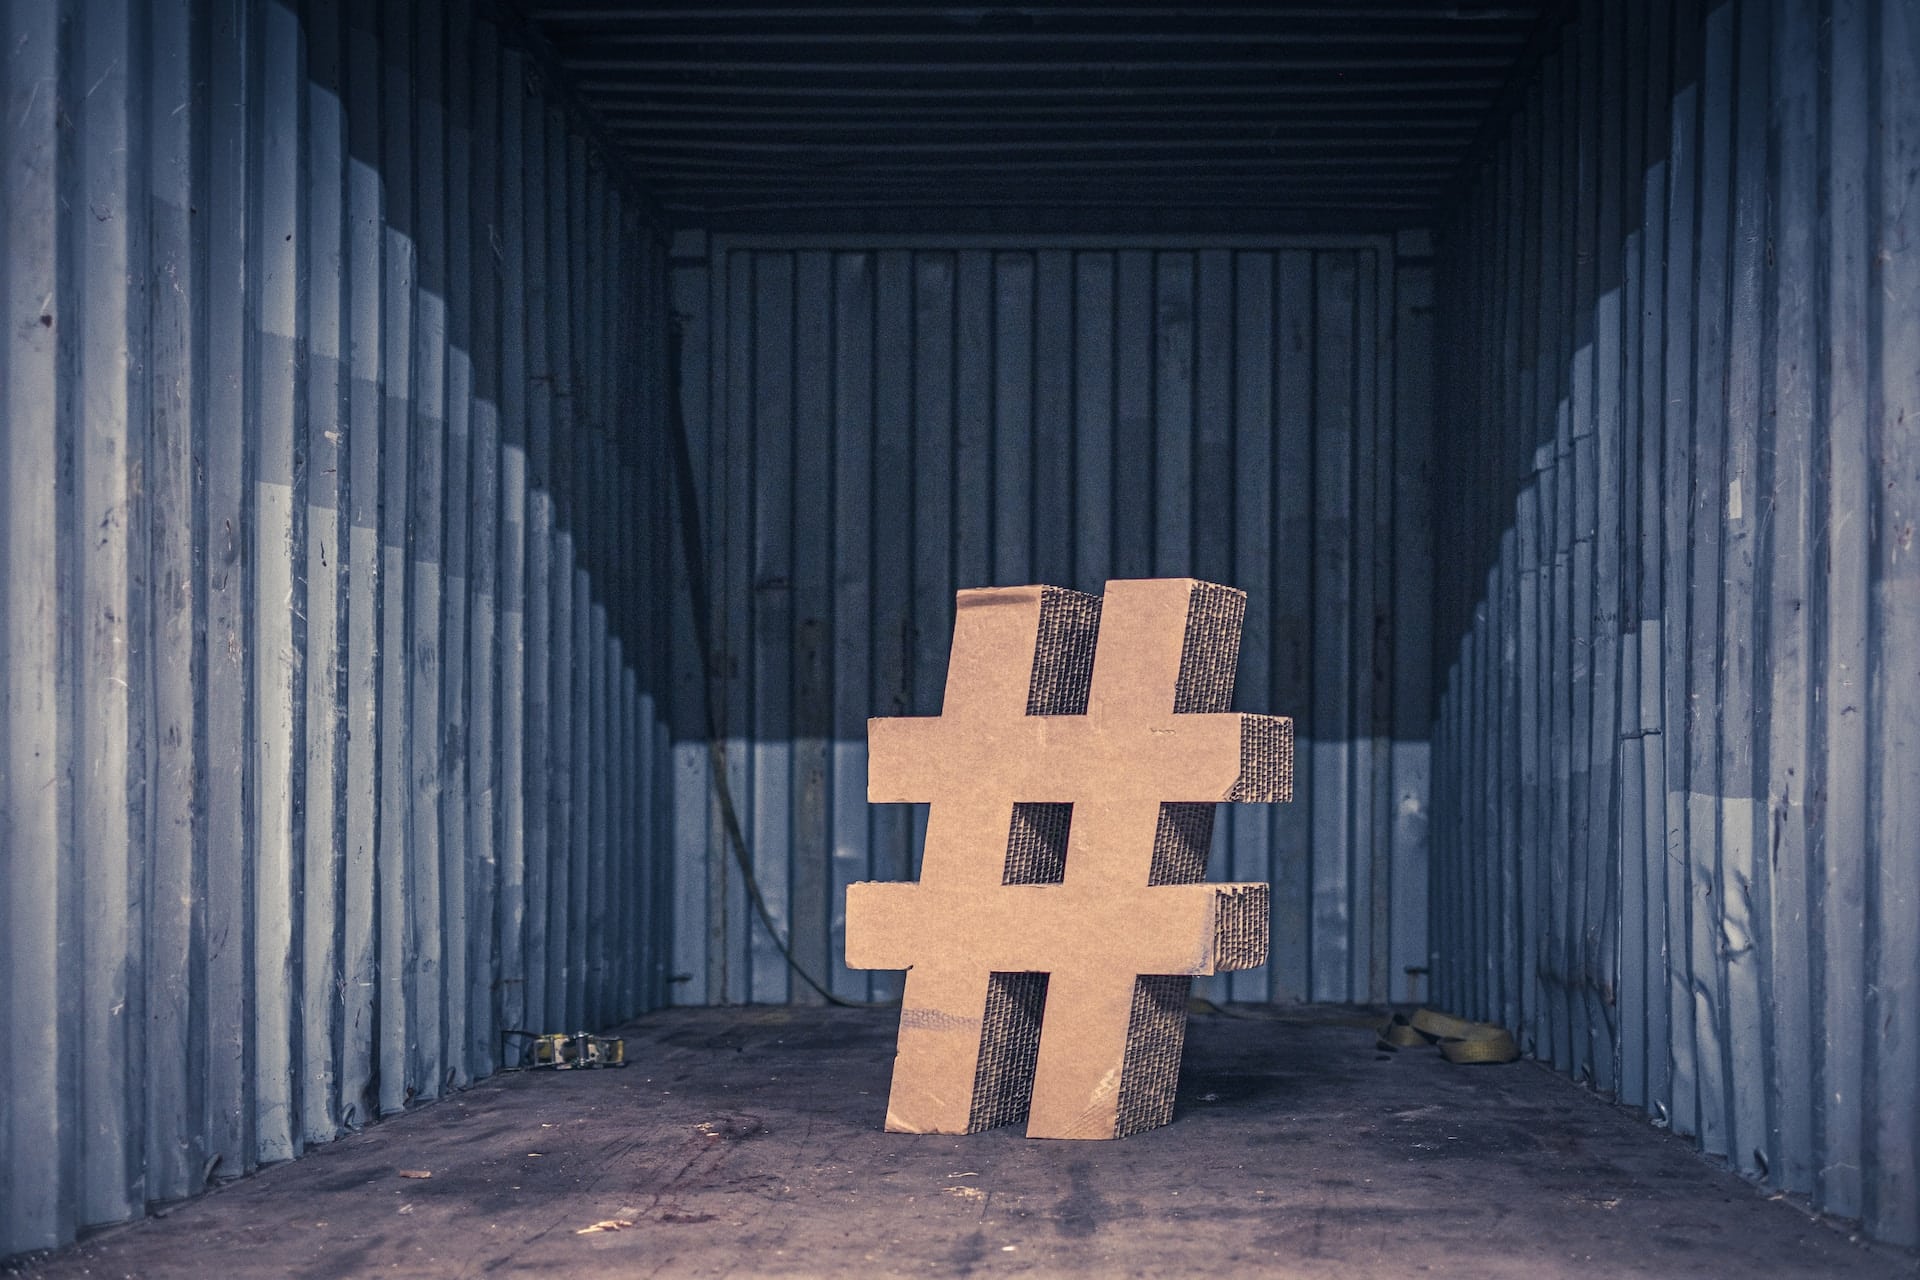 Hashtag Research and Usage: Understanding How to Research and Use Relevant Hashtags Strategically to Increase Visibility on Instagram and Attract New Followers